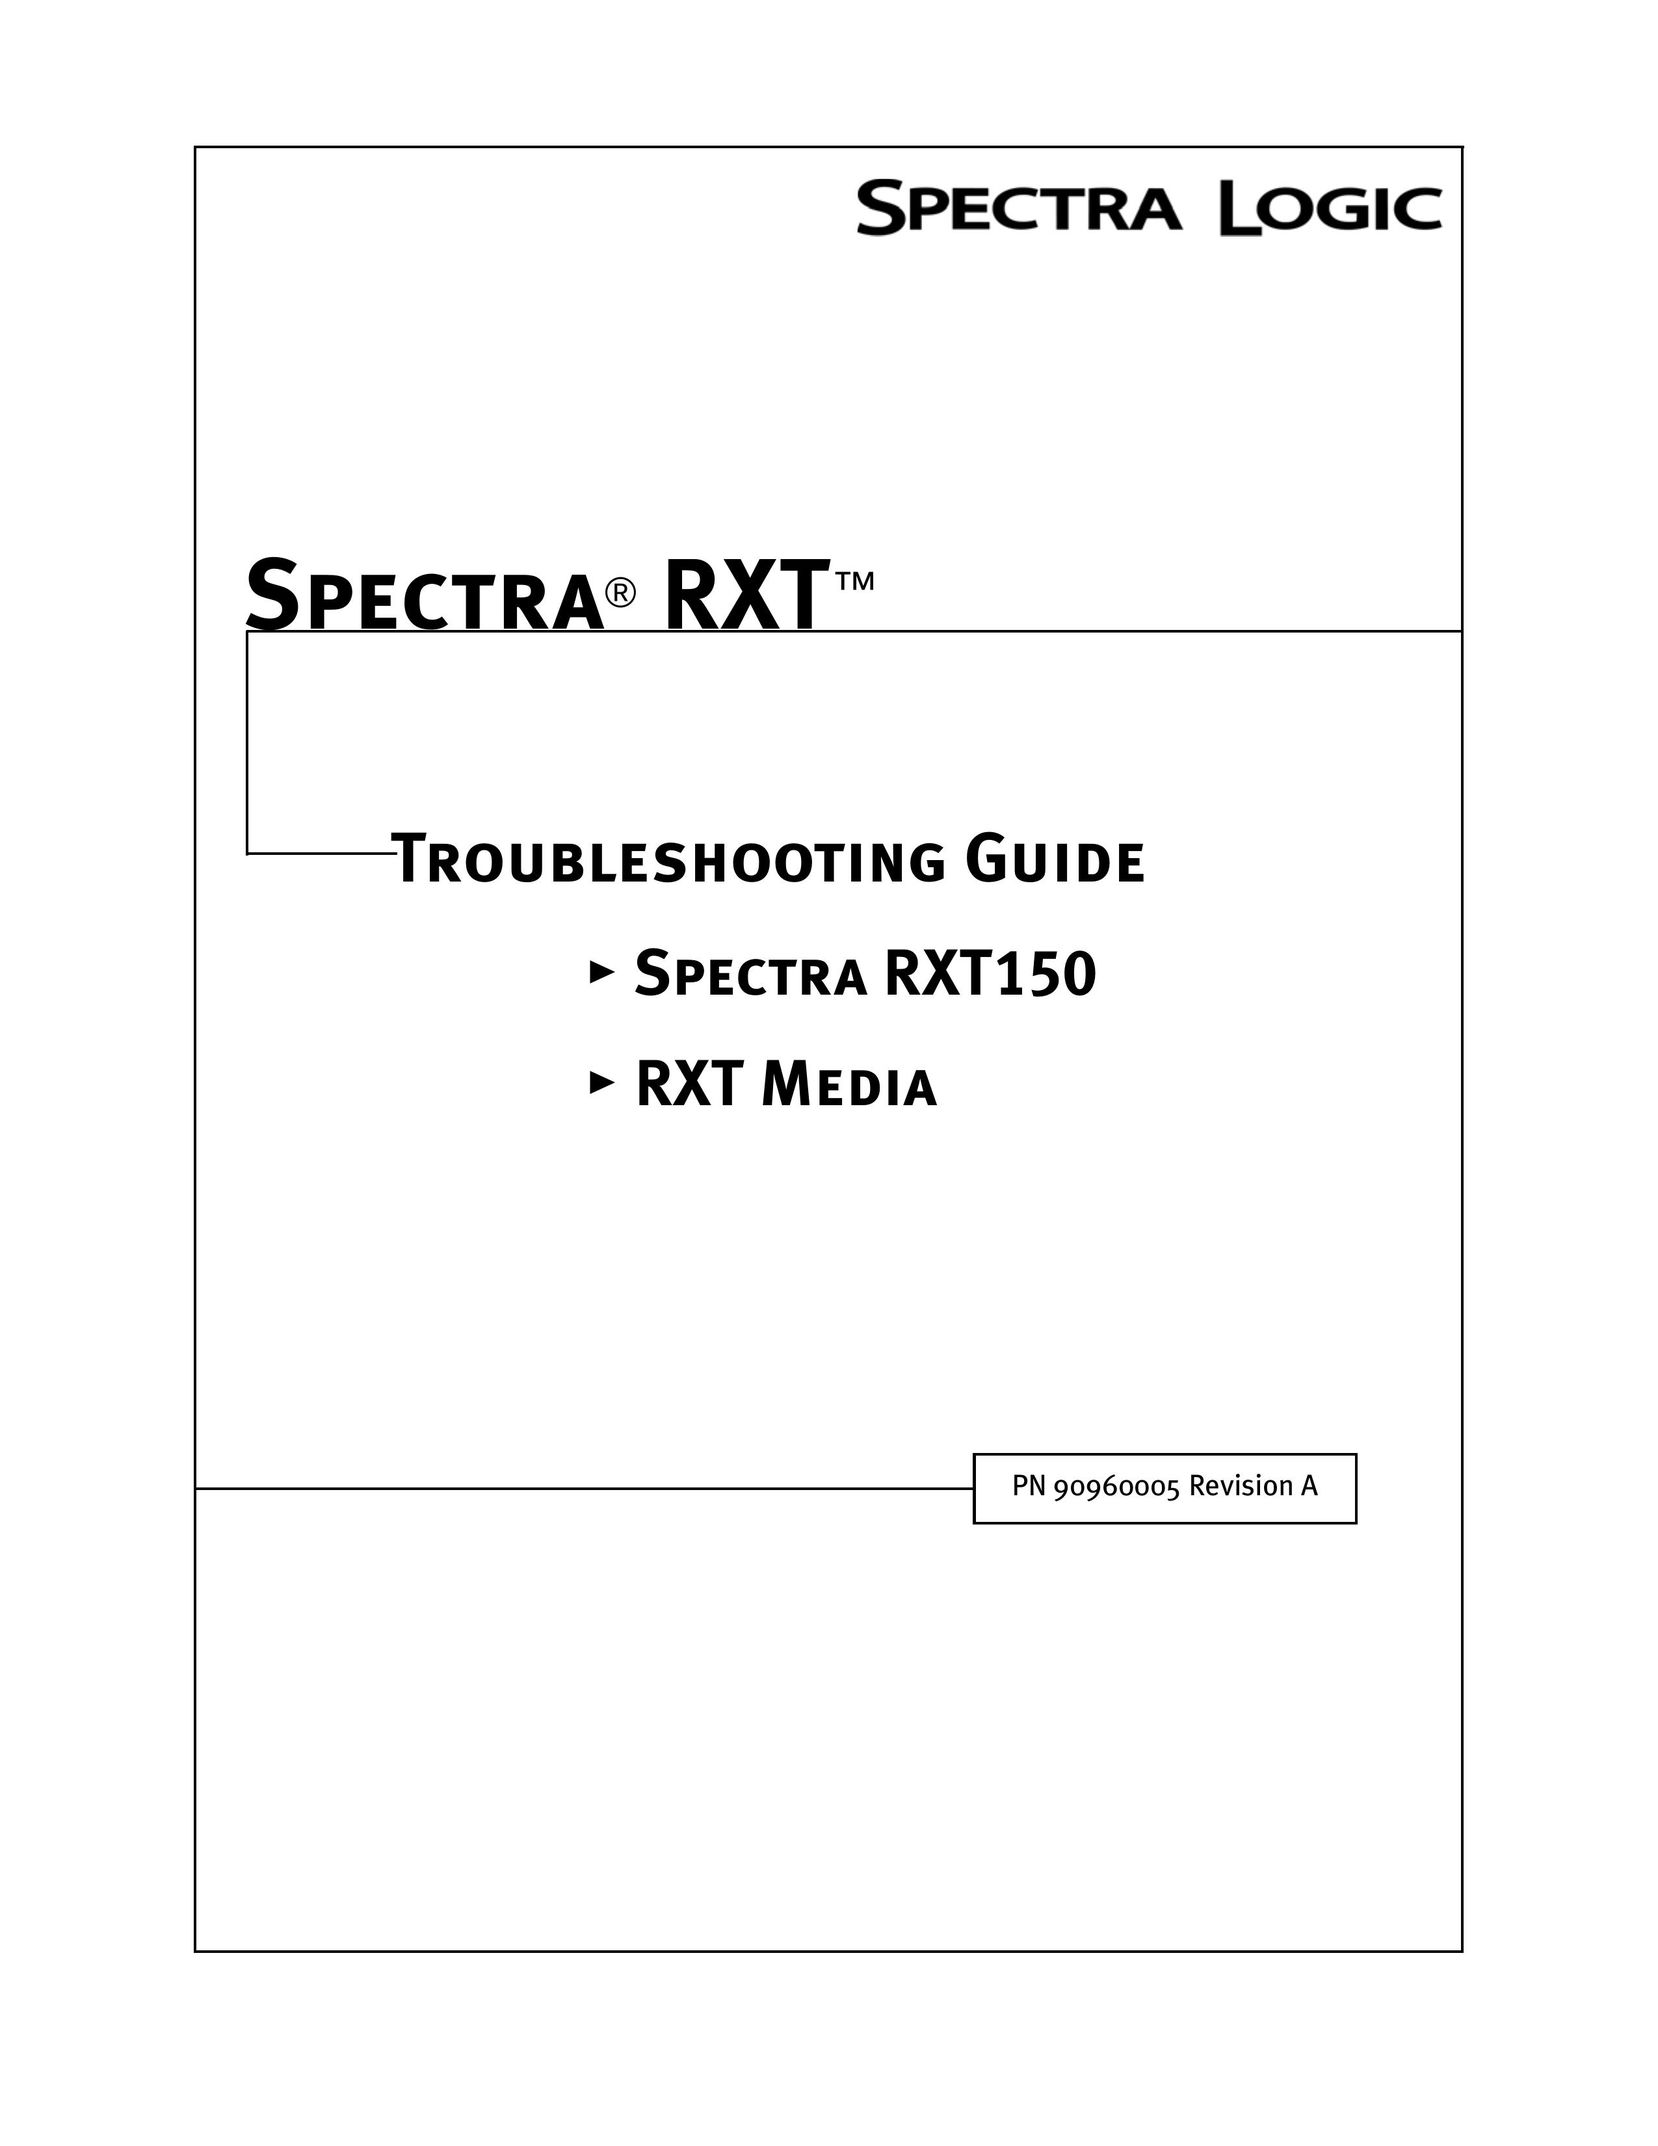 Spectra Logic RXT150 Computer Accessories User Manual